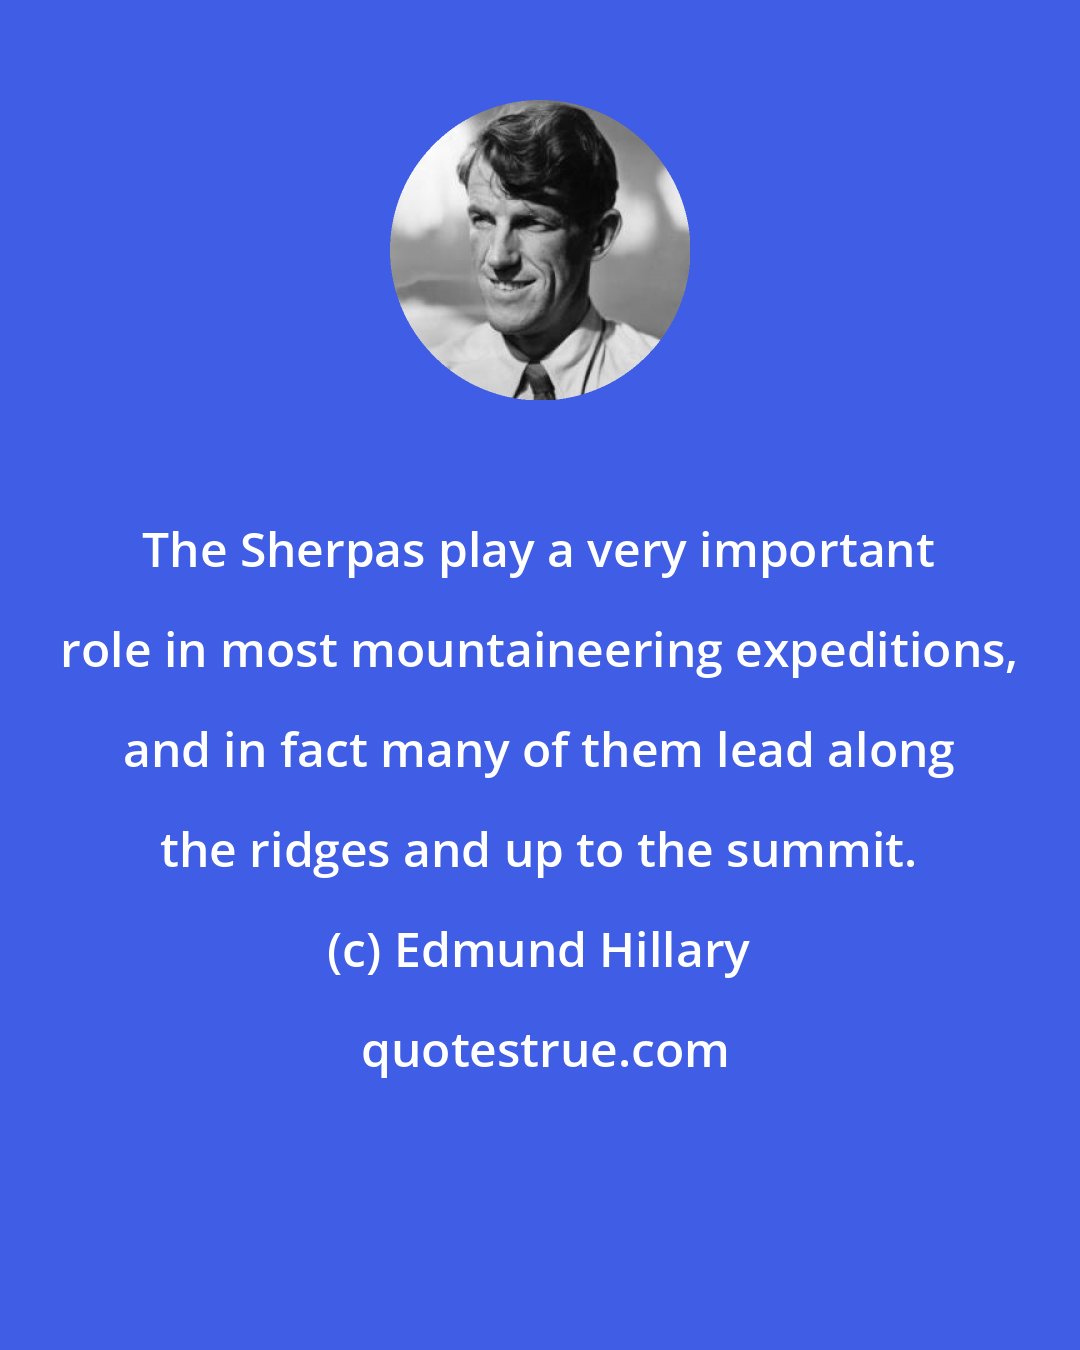 Edmund Hillary: The Sherpas play a very important role in most mountaineering expeditions, and in fact many of them lead along the ridges and up to the summit.